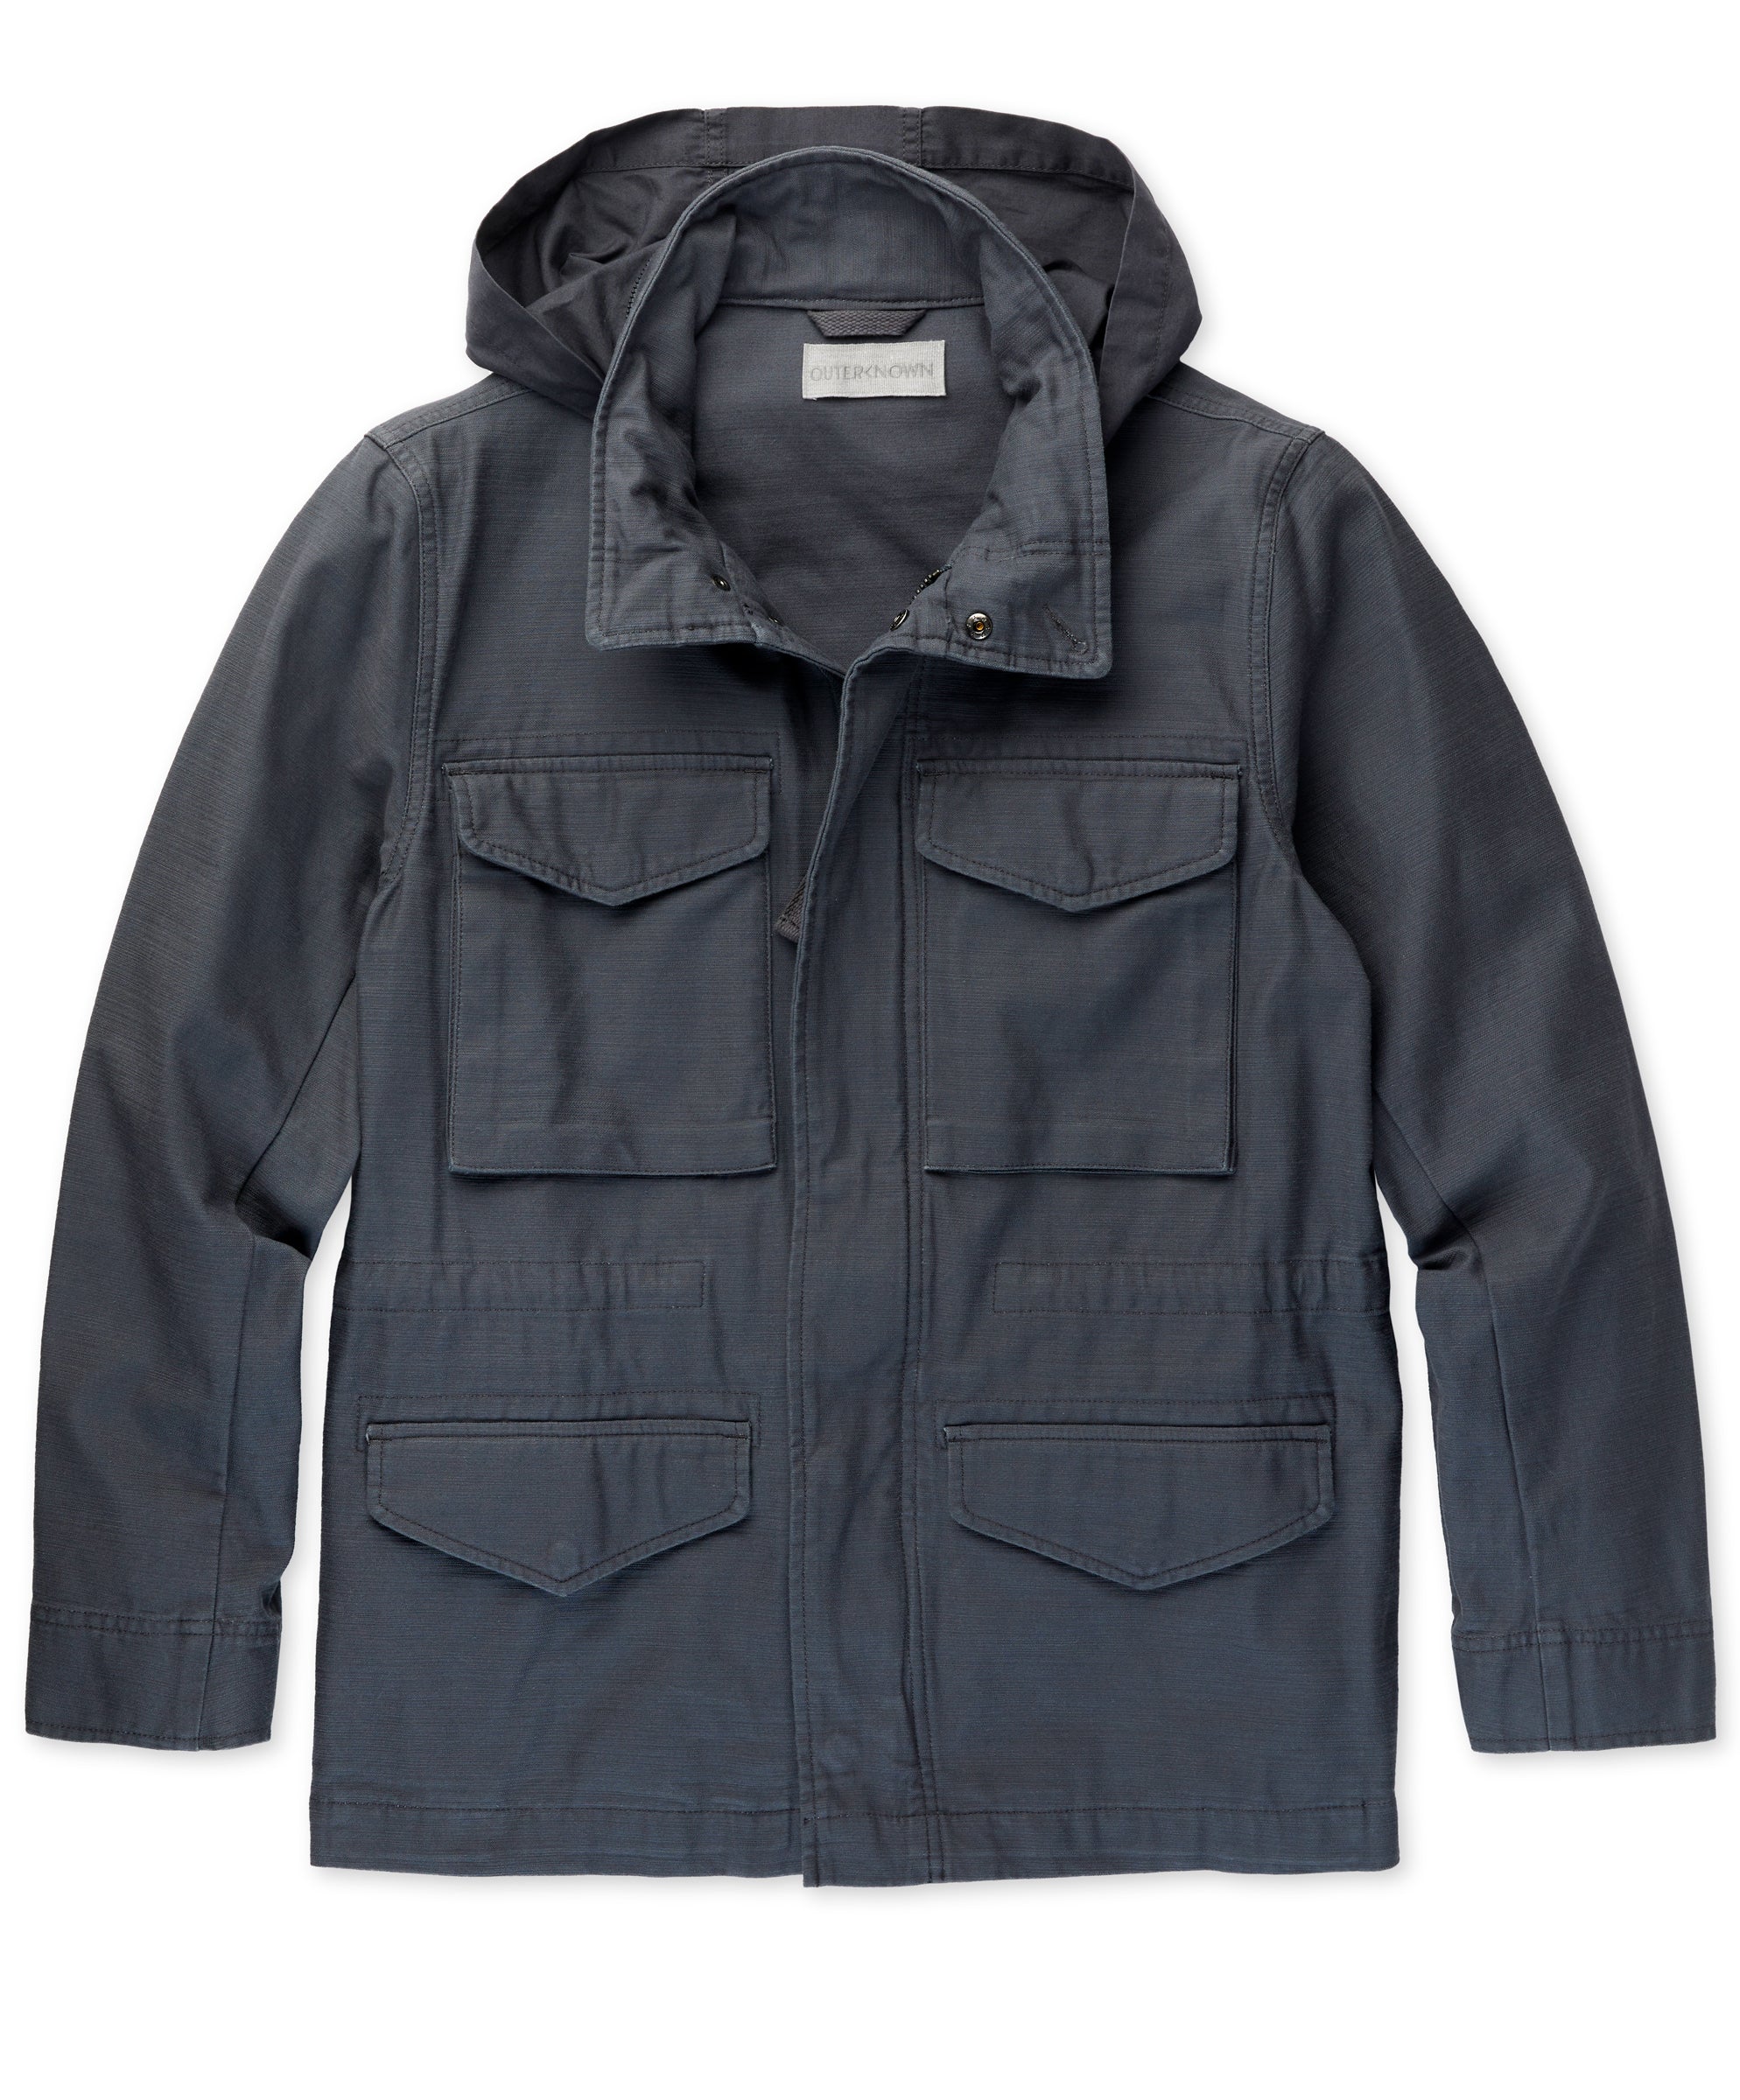 Voyager Jacket | Men's Outerwear | Outerknown